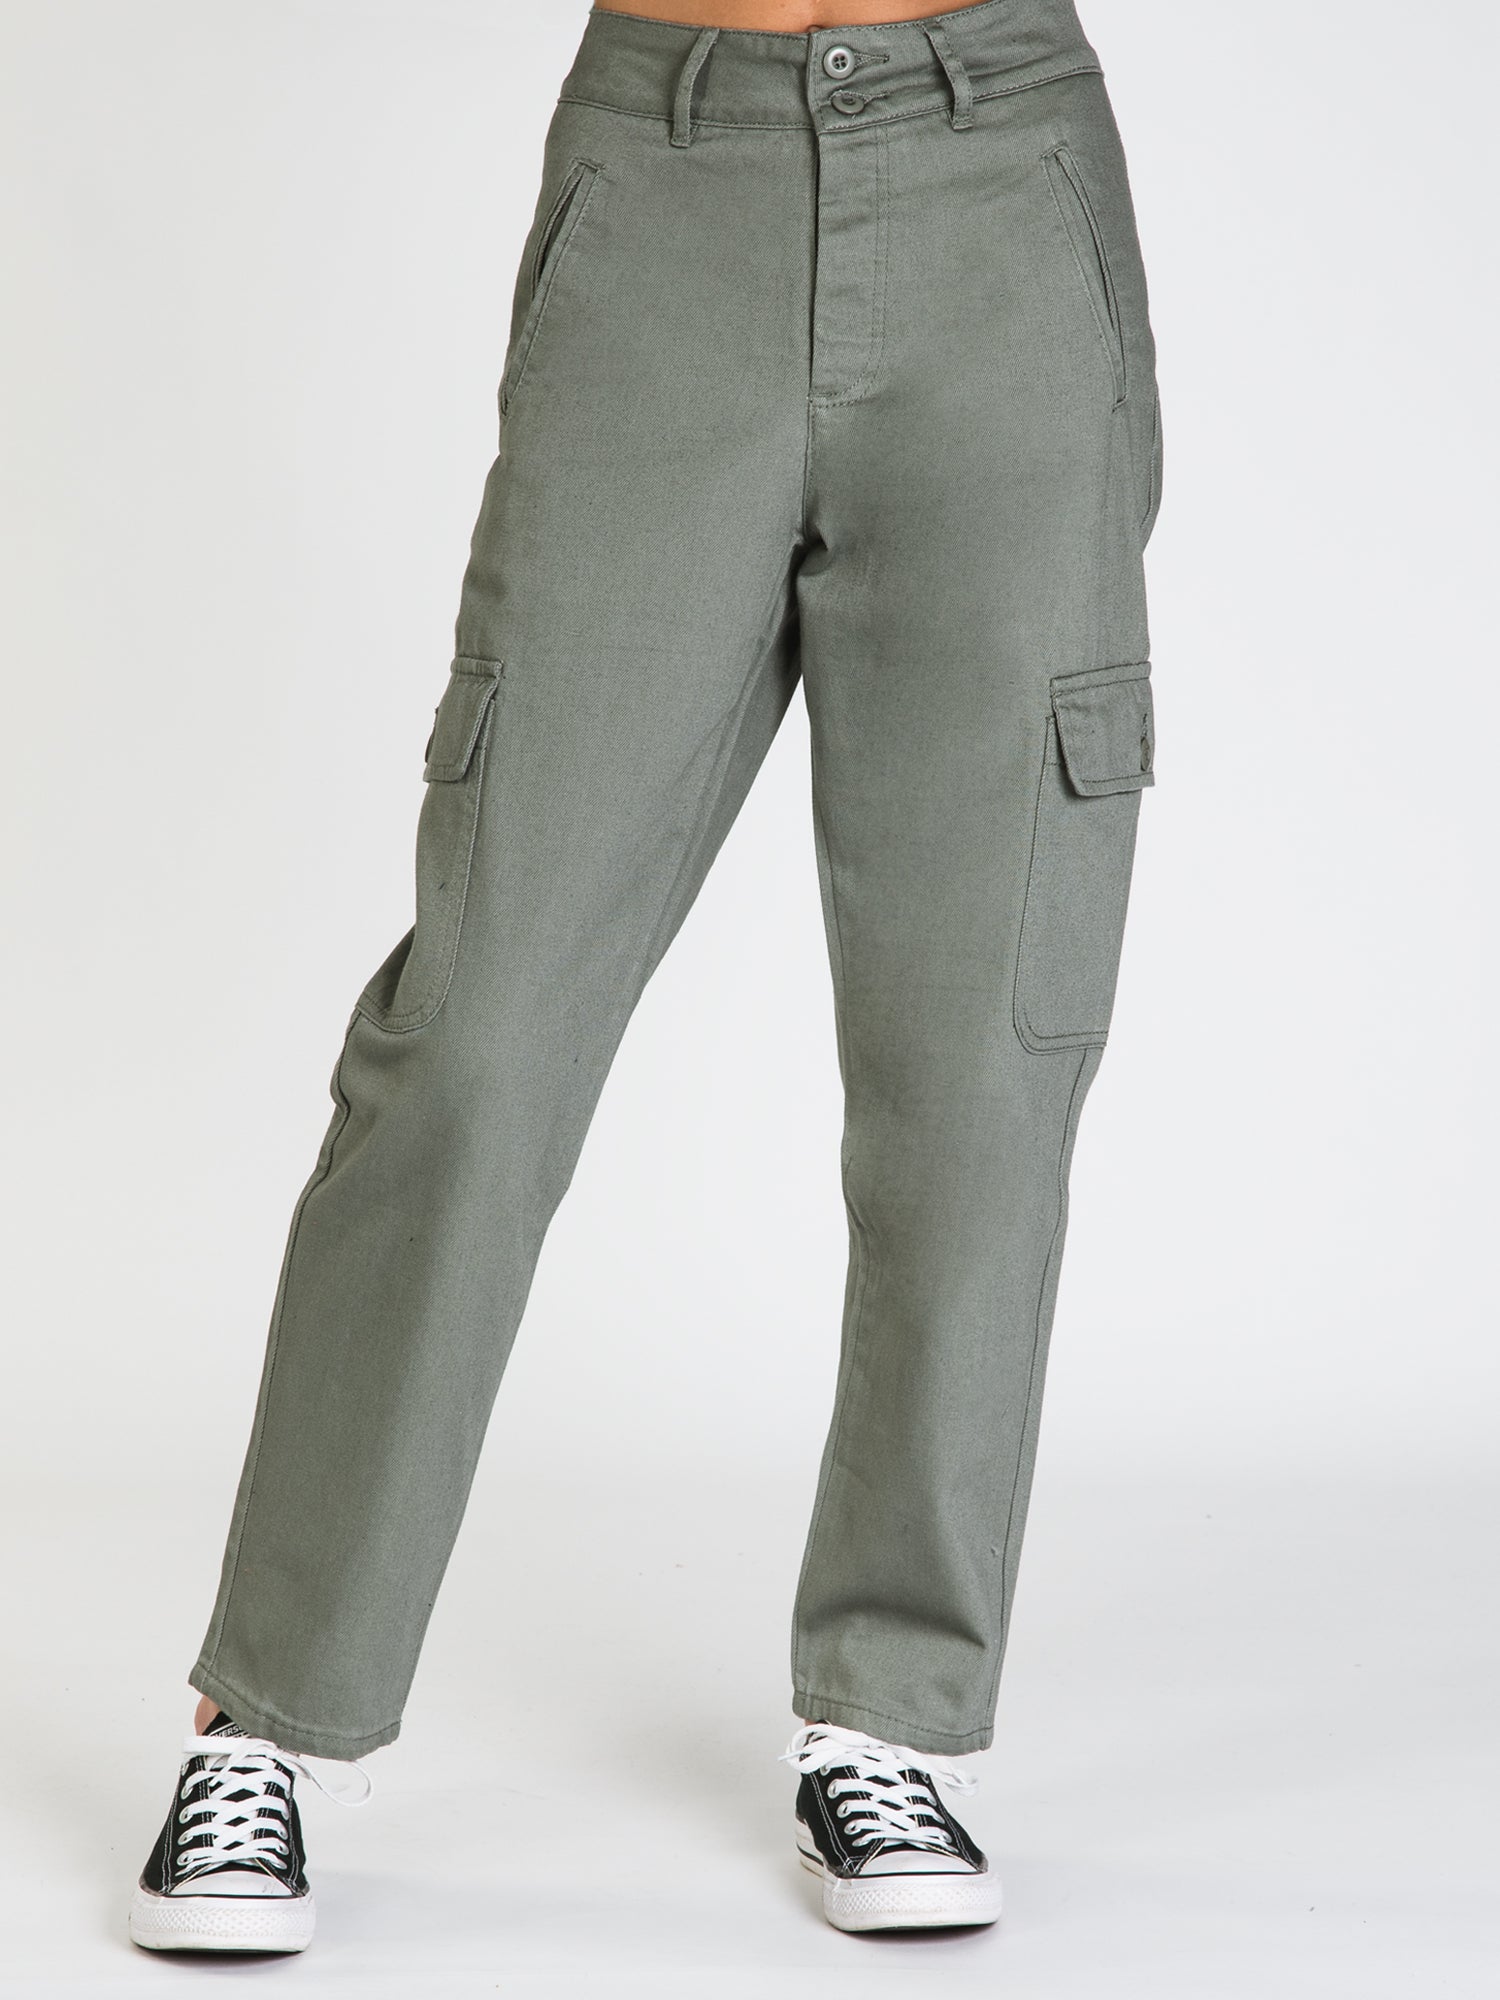 HARLOW HIGH RISE FLARE CHECK PANTS - CLEARANCE